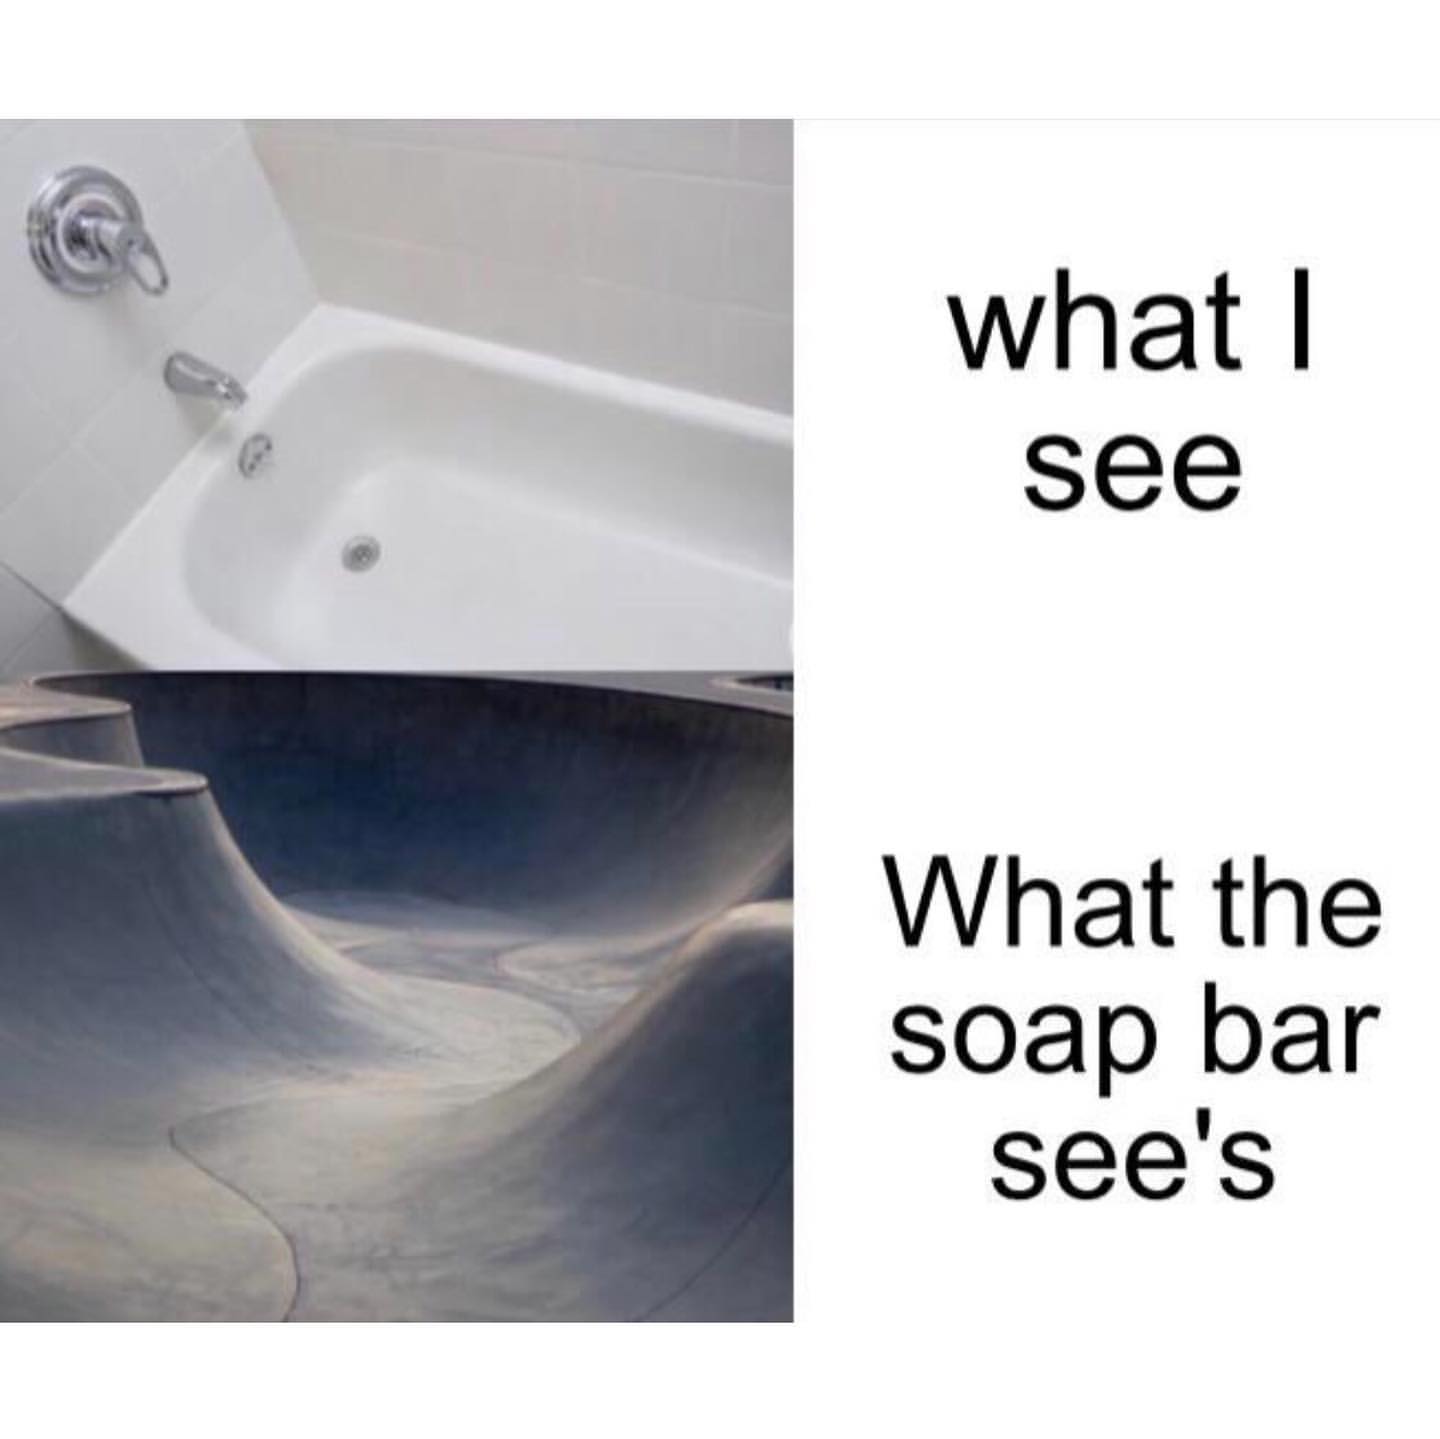 What I see. What the soap bar see's.